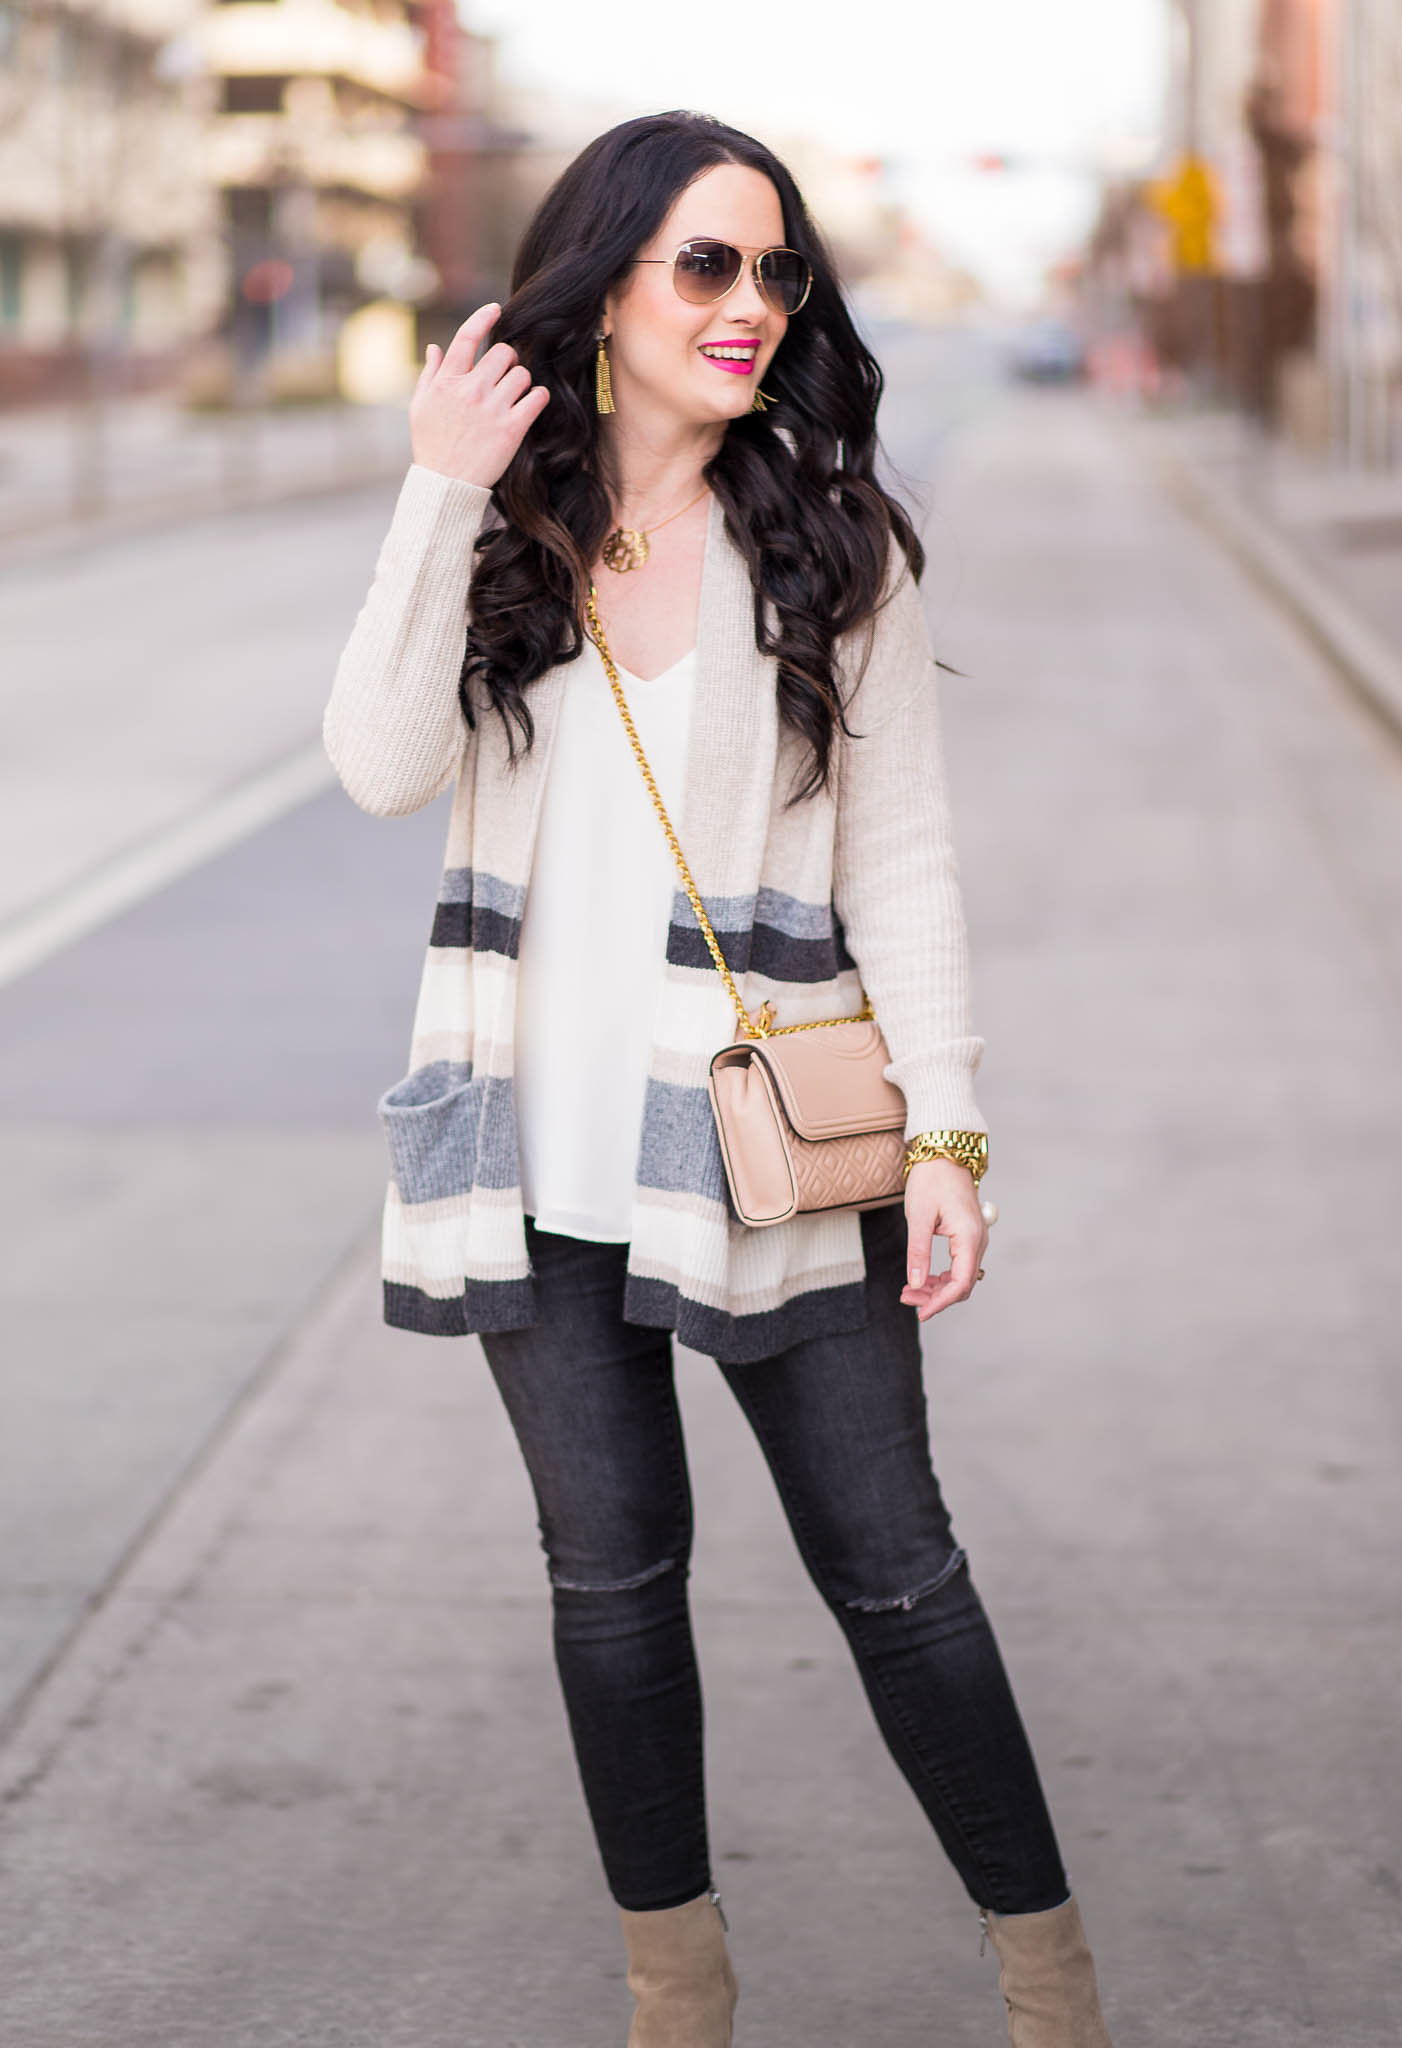 The Double Take Girls Style Blog January Q&A + LOFT Cardigans Promo